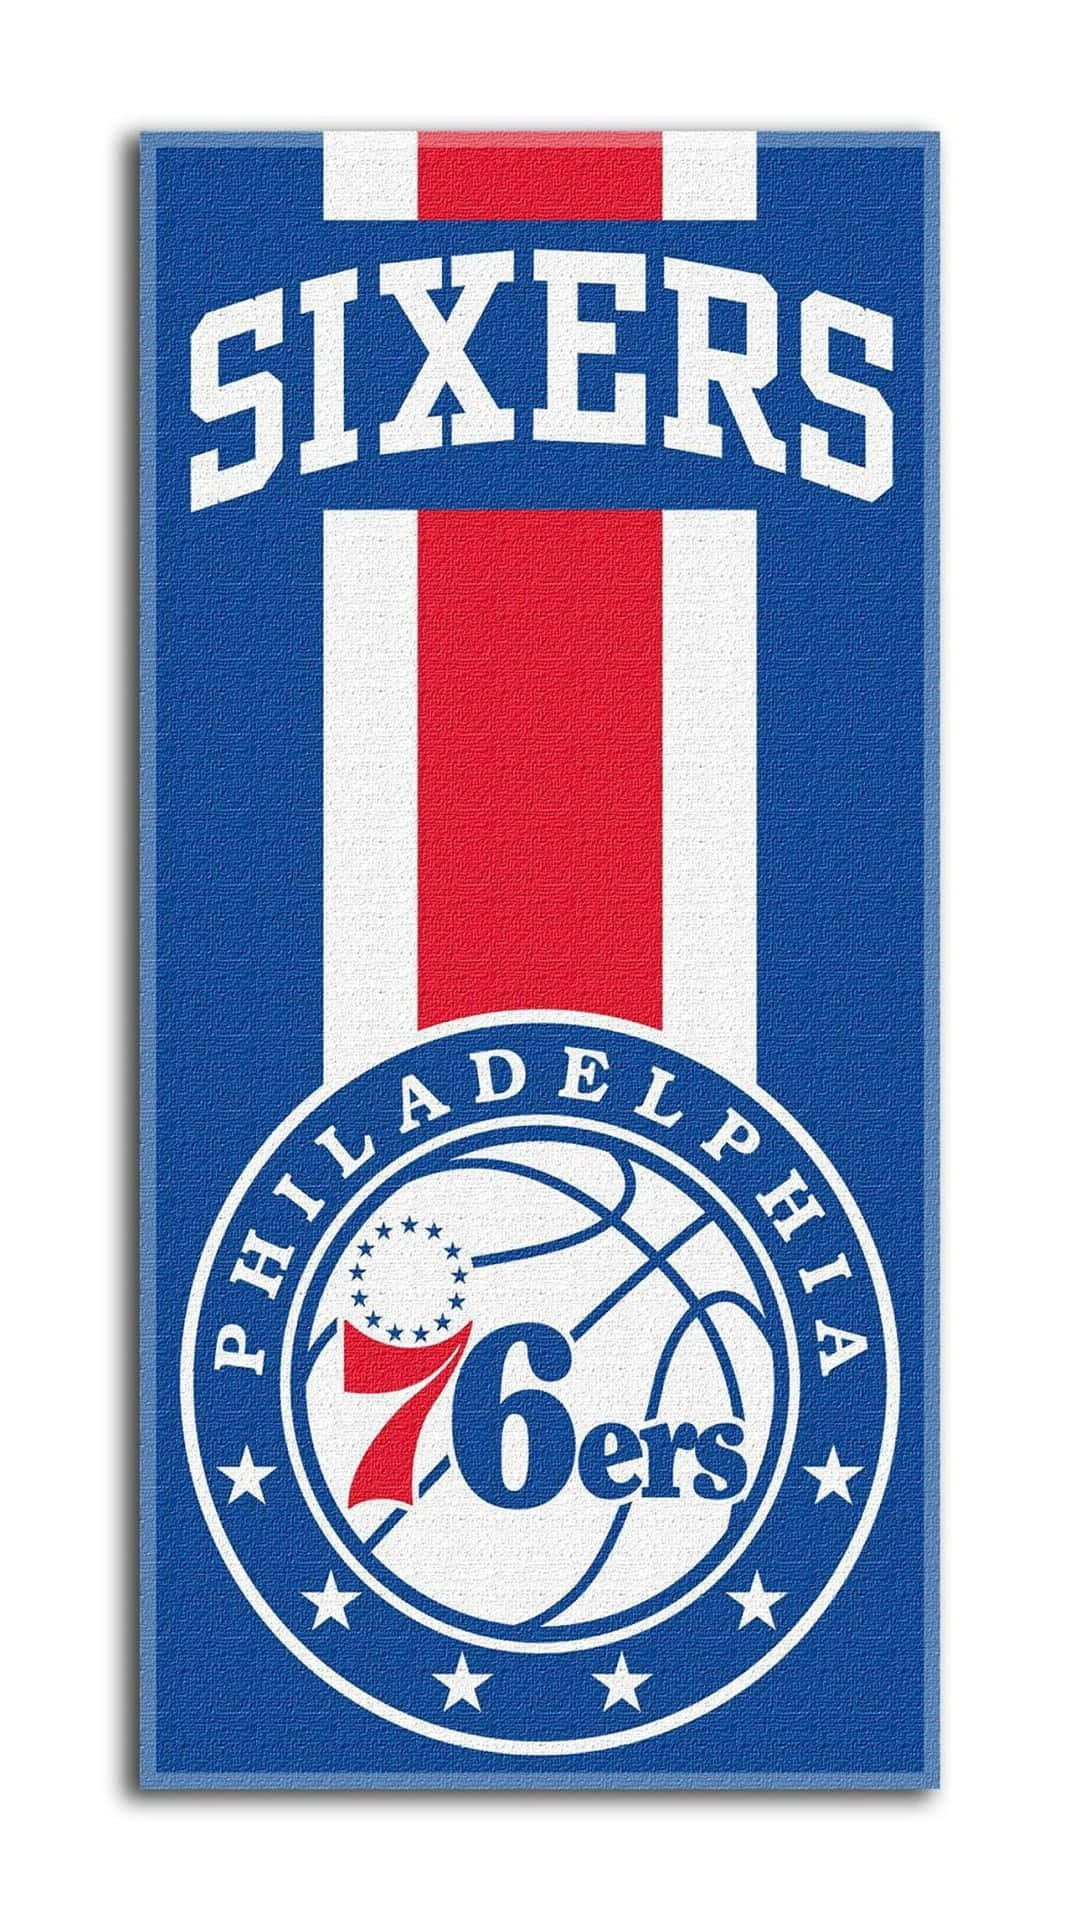 Show your Philly pride with the Sixers Iphone. This sleek and slim phone is an absolute must have for all fans of the 76ers! Wallpaper